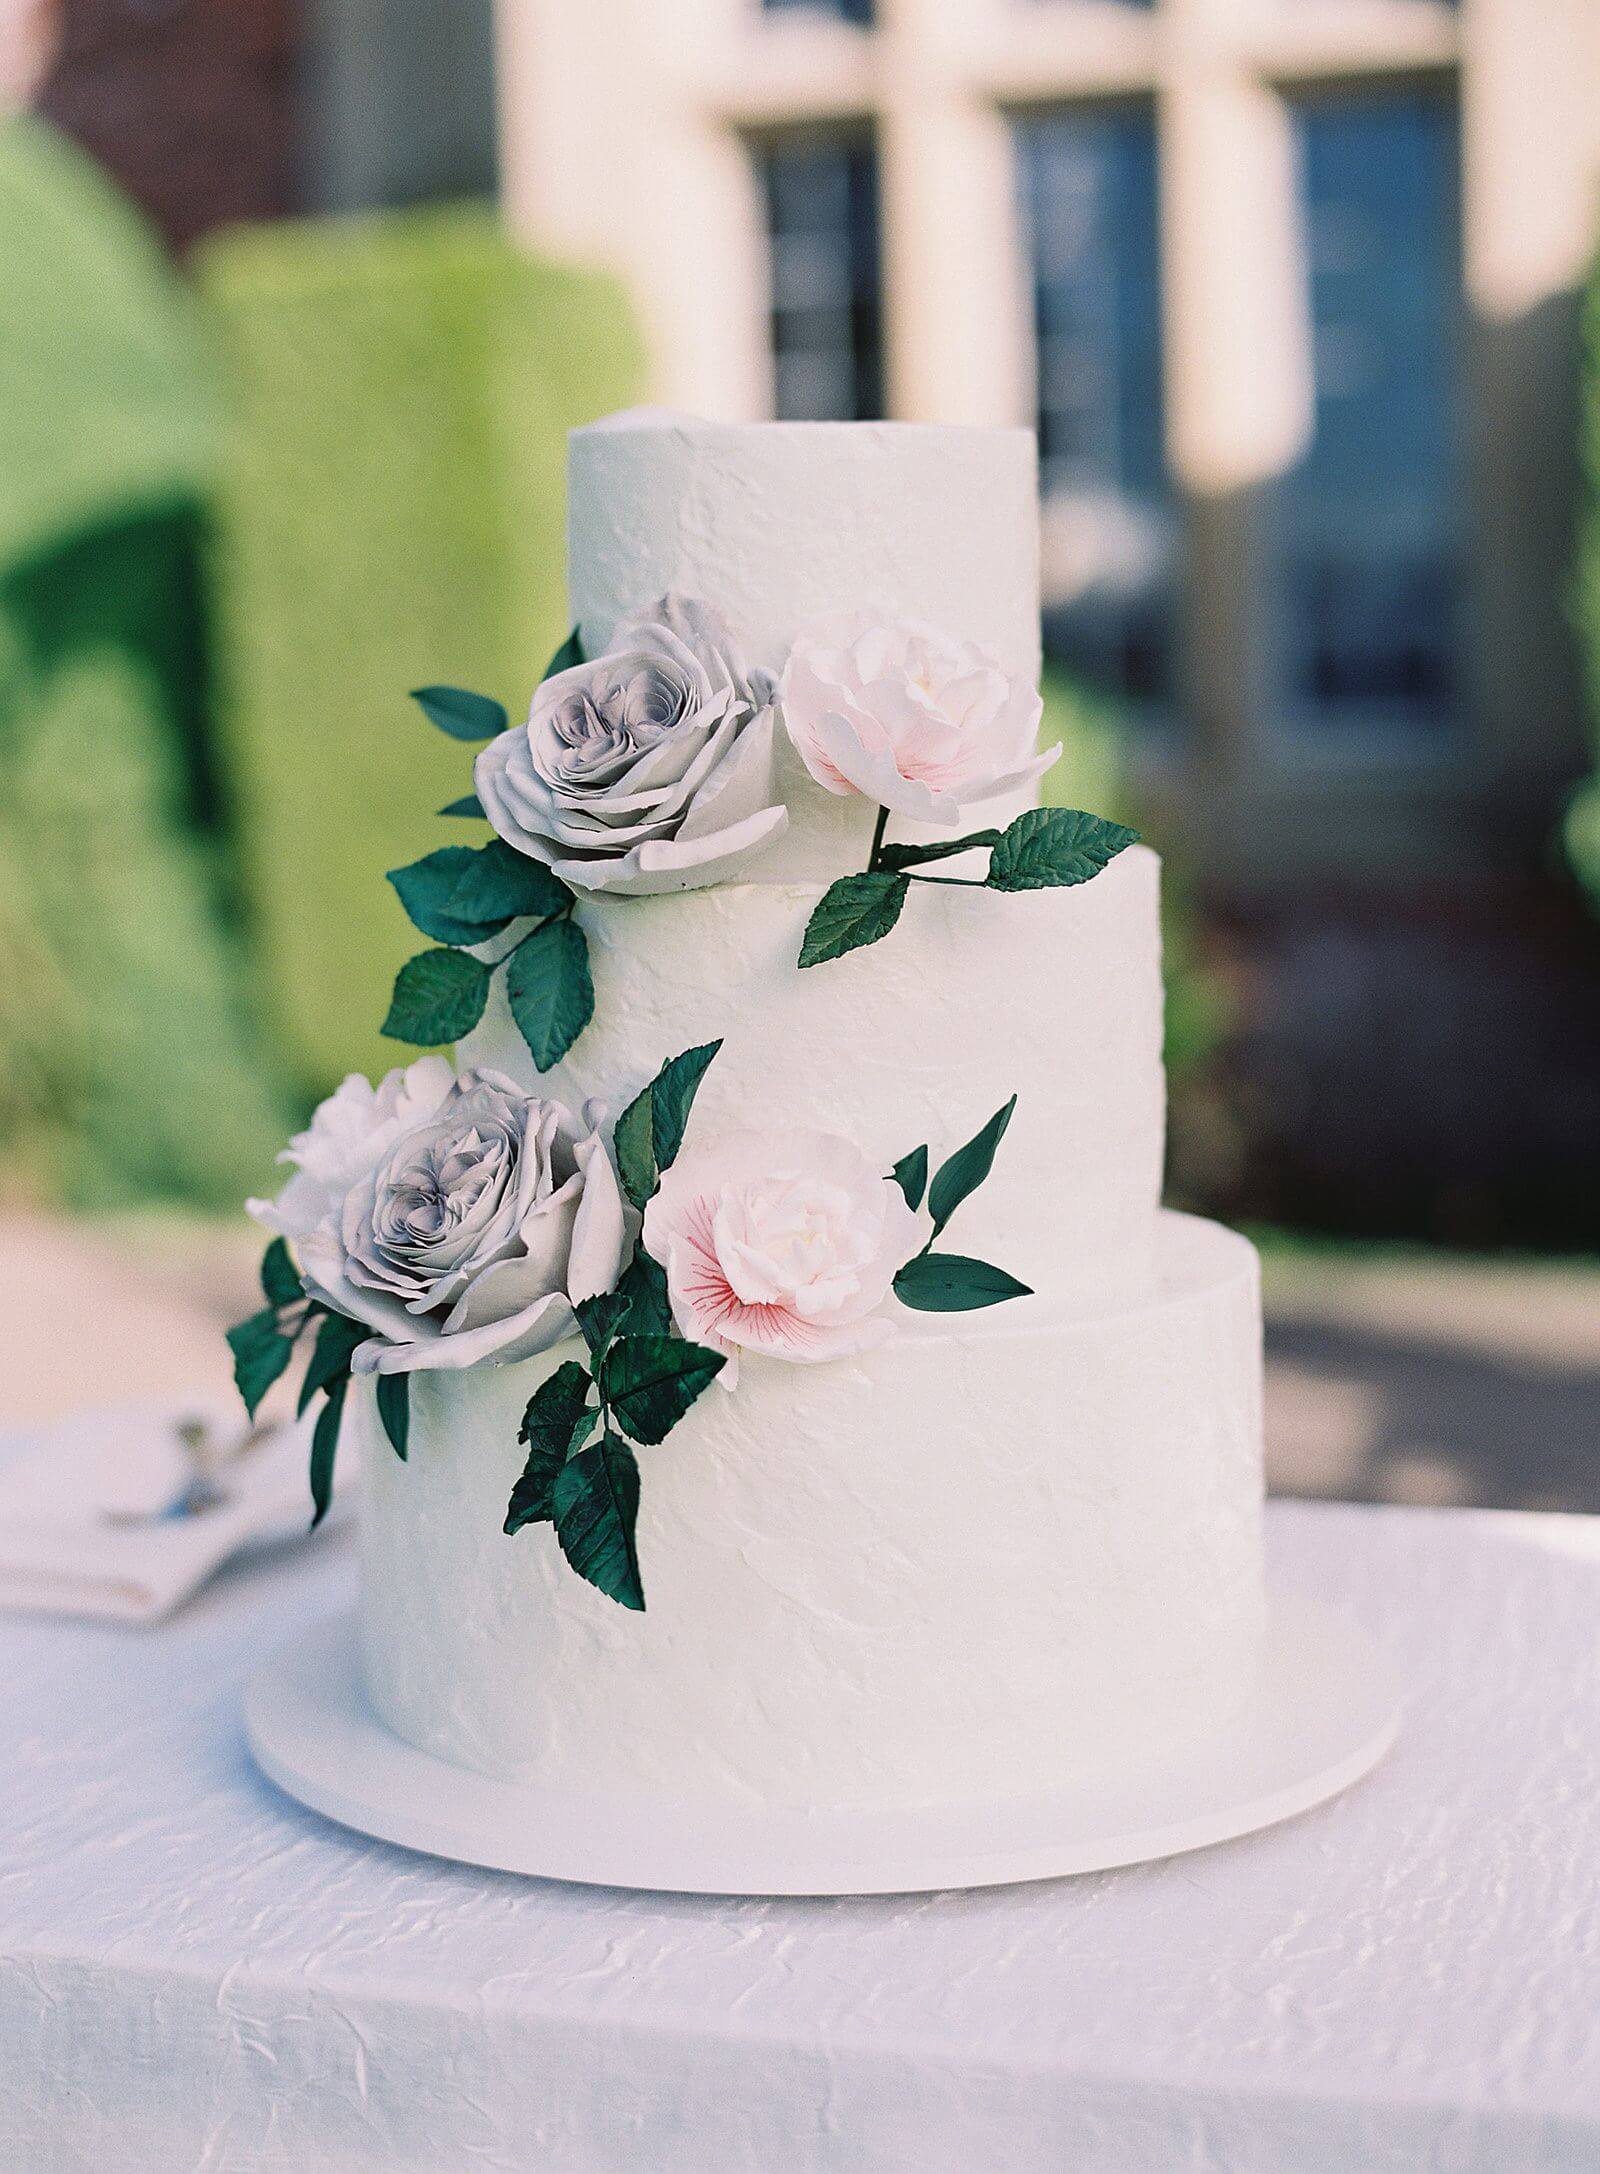 White three tiered wedding cake with faux sugar flowers - Jacqueline Benét Photography